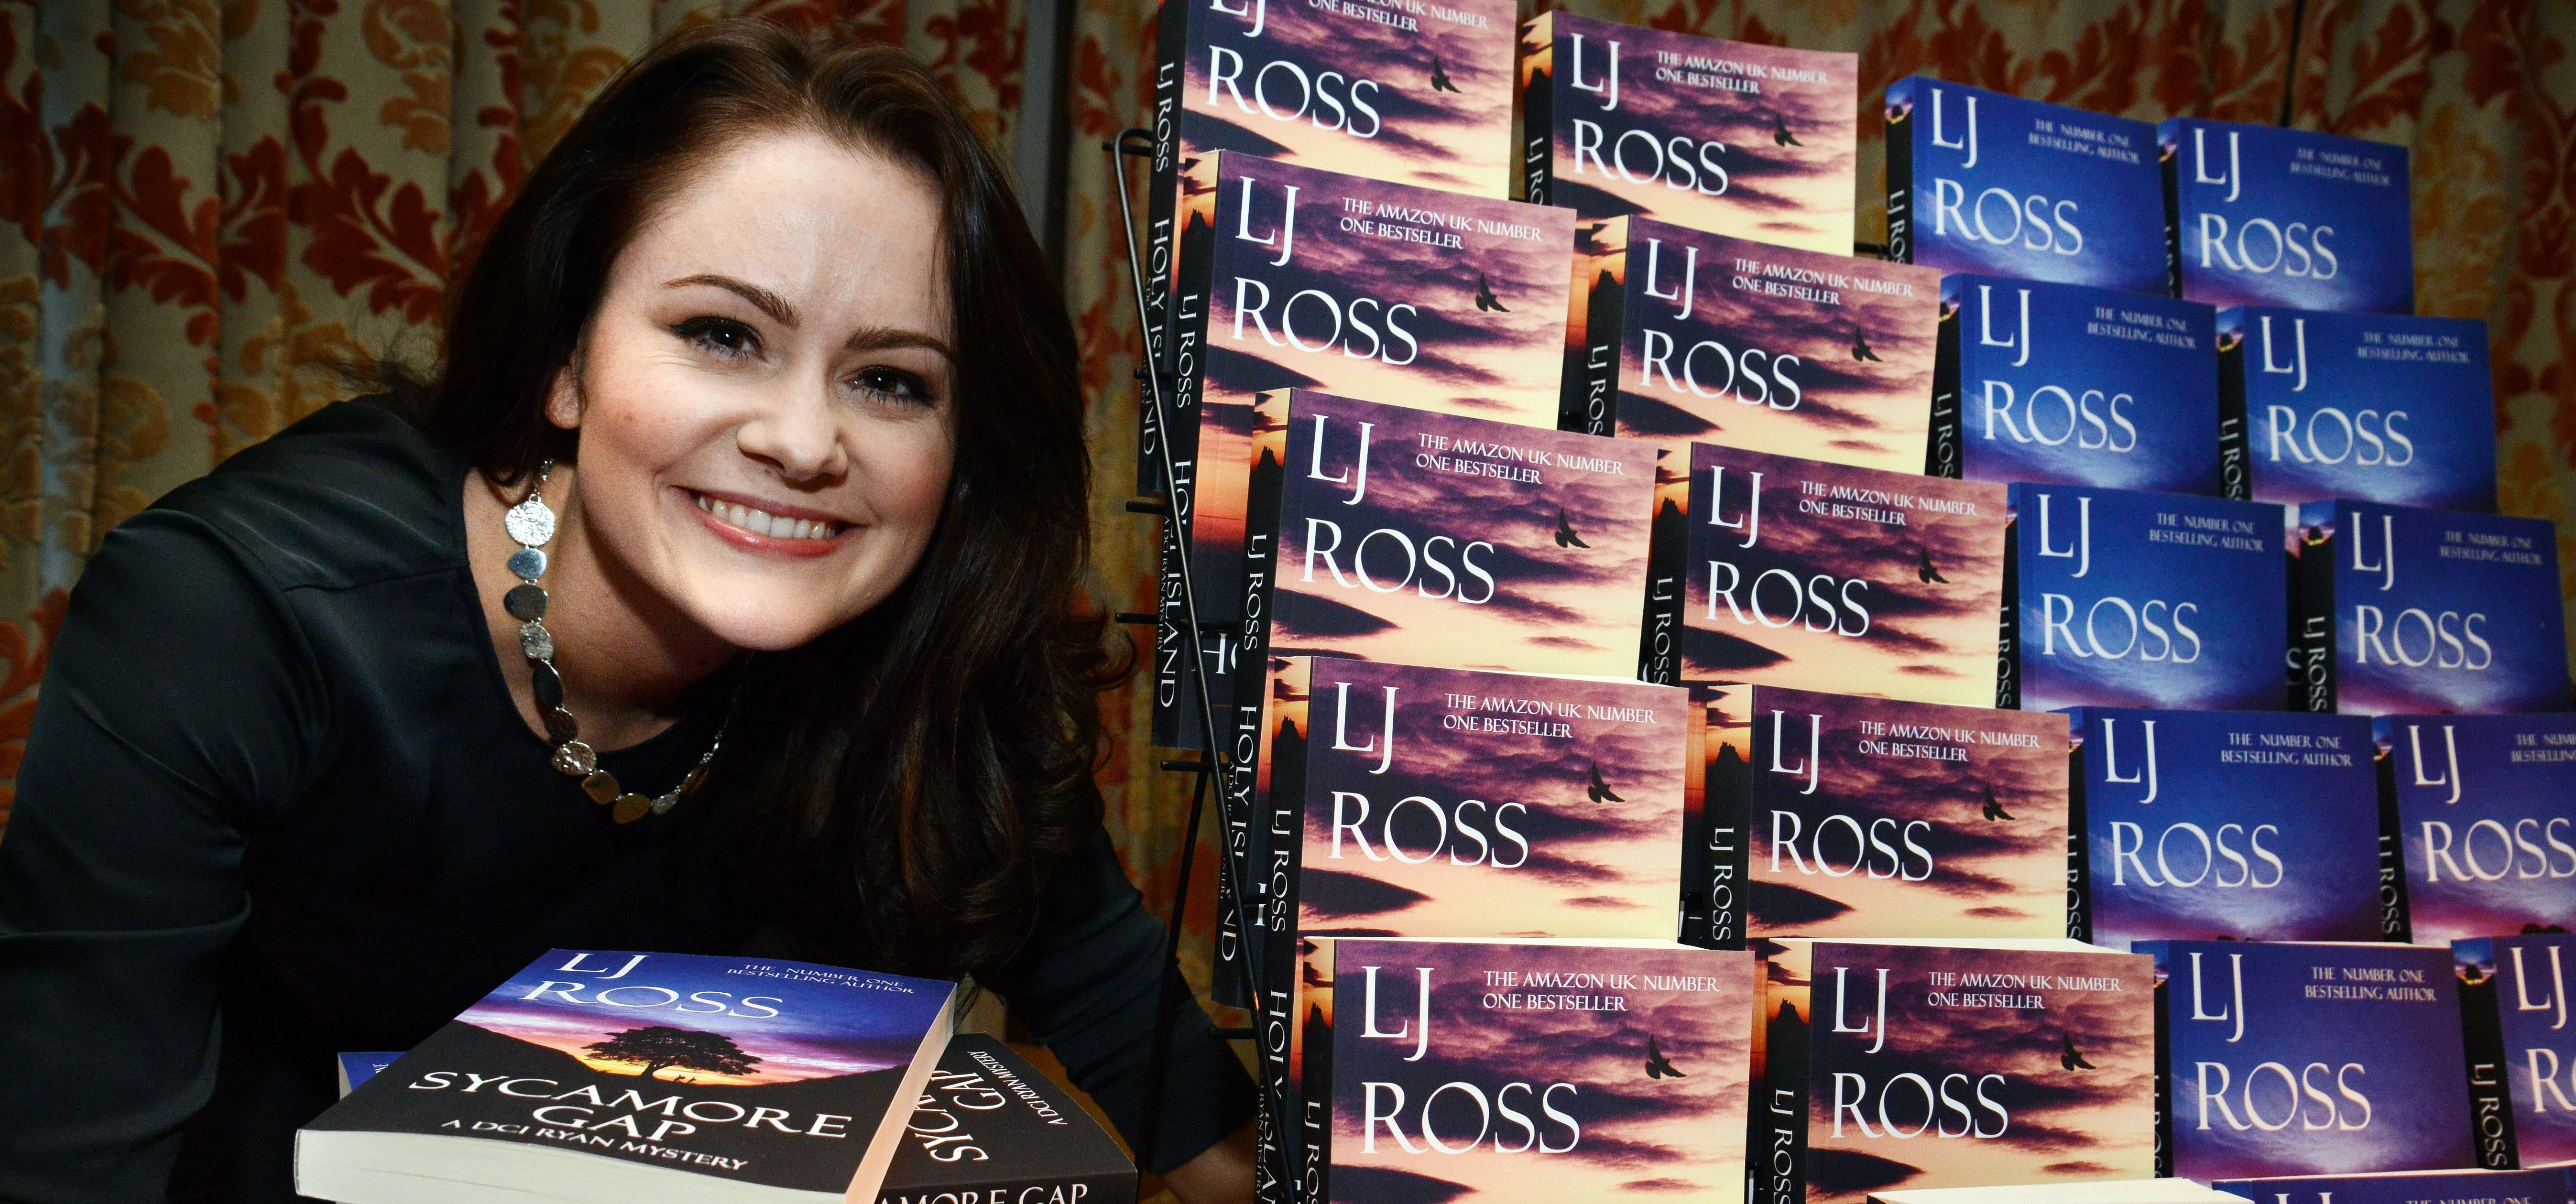 North East crime author LJ Ross at the launch of her new paperback Sycamore Gap